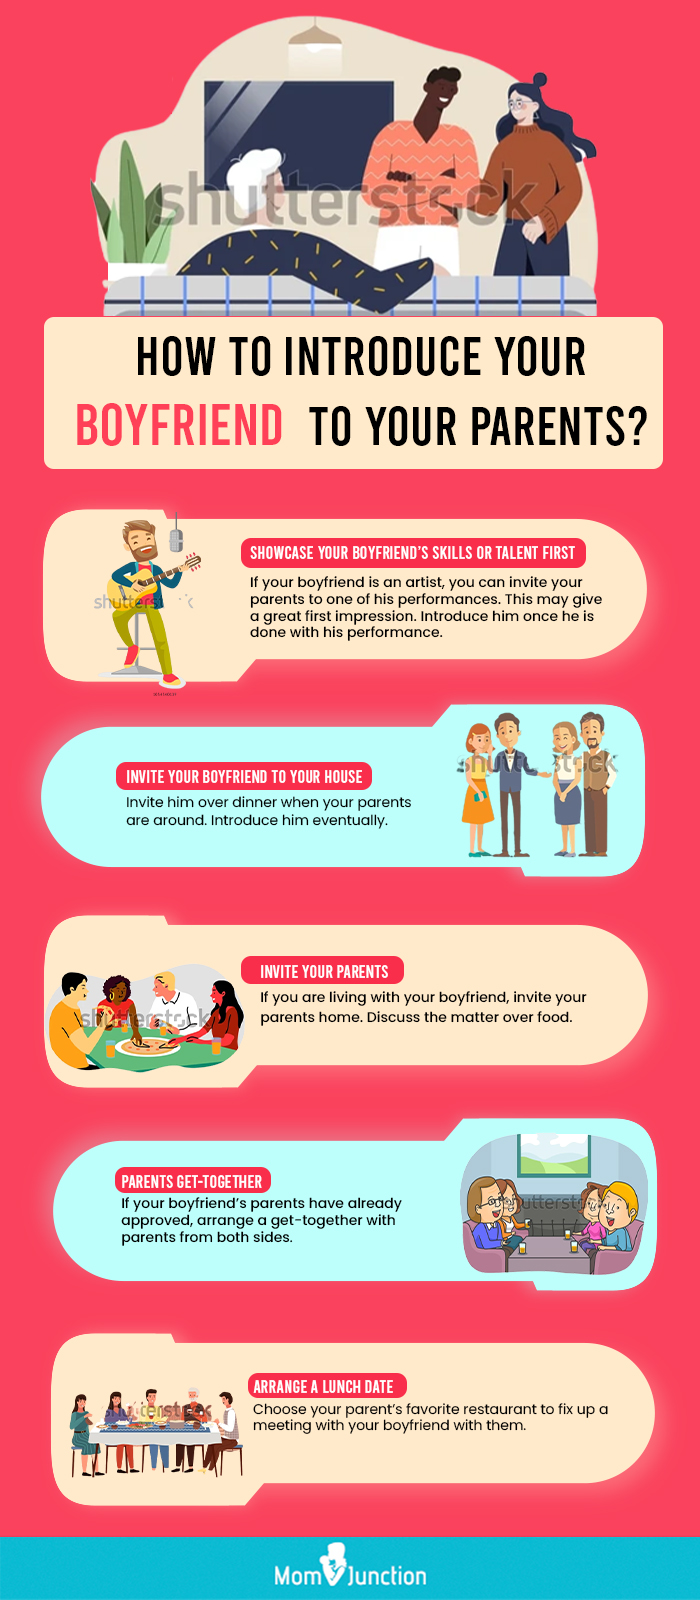 how to introduce your boyfriend to your parents (infographic)